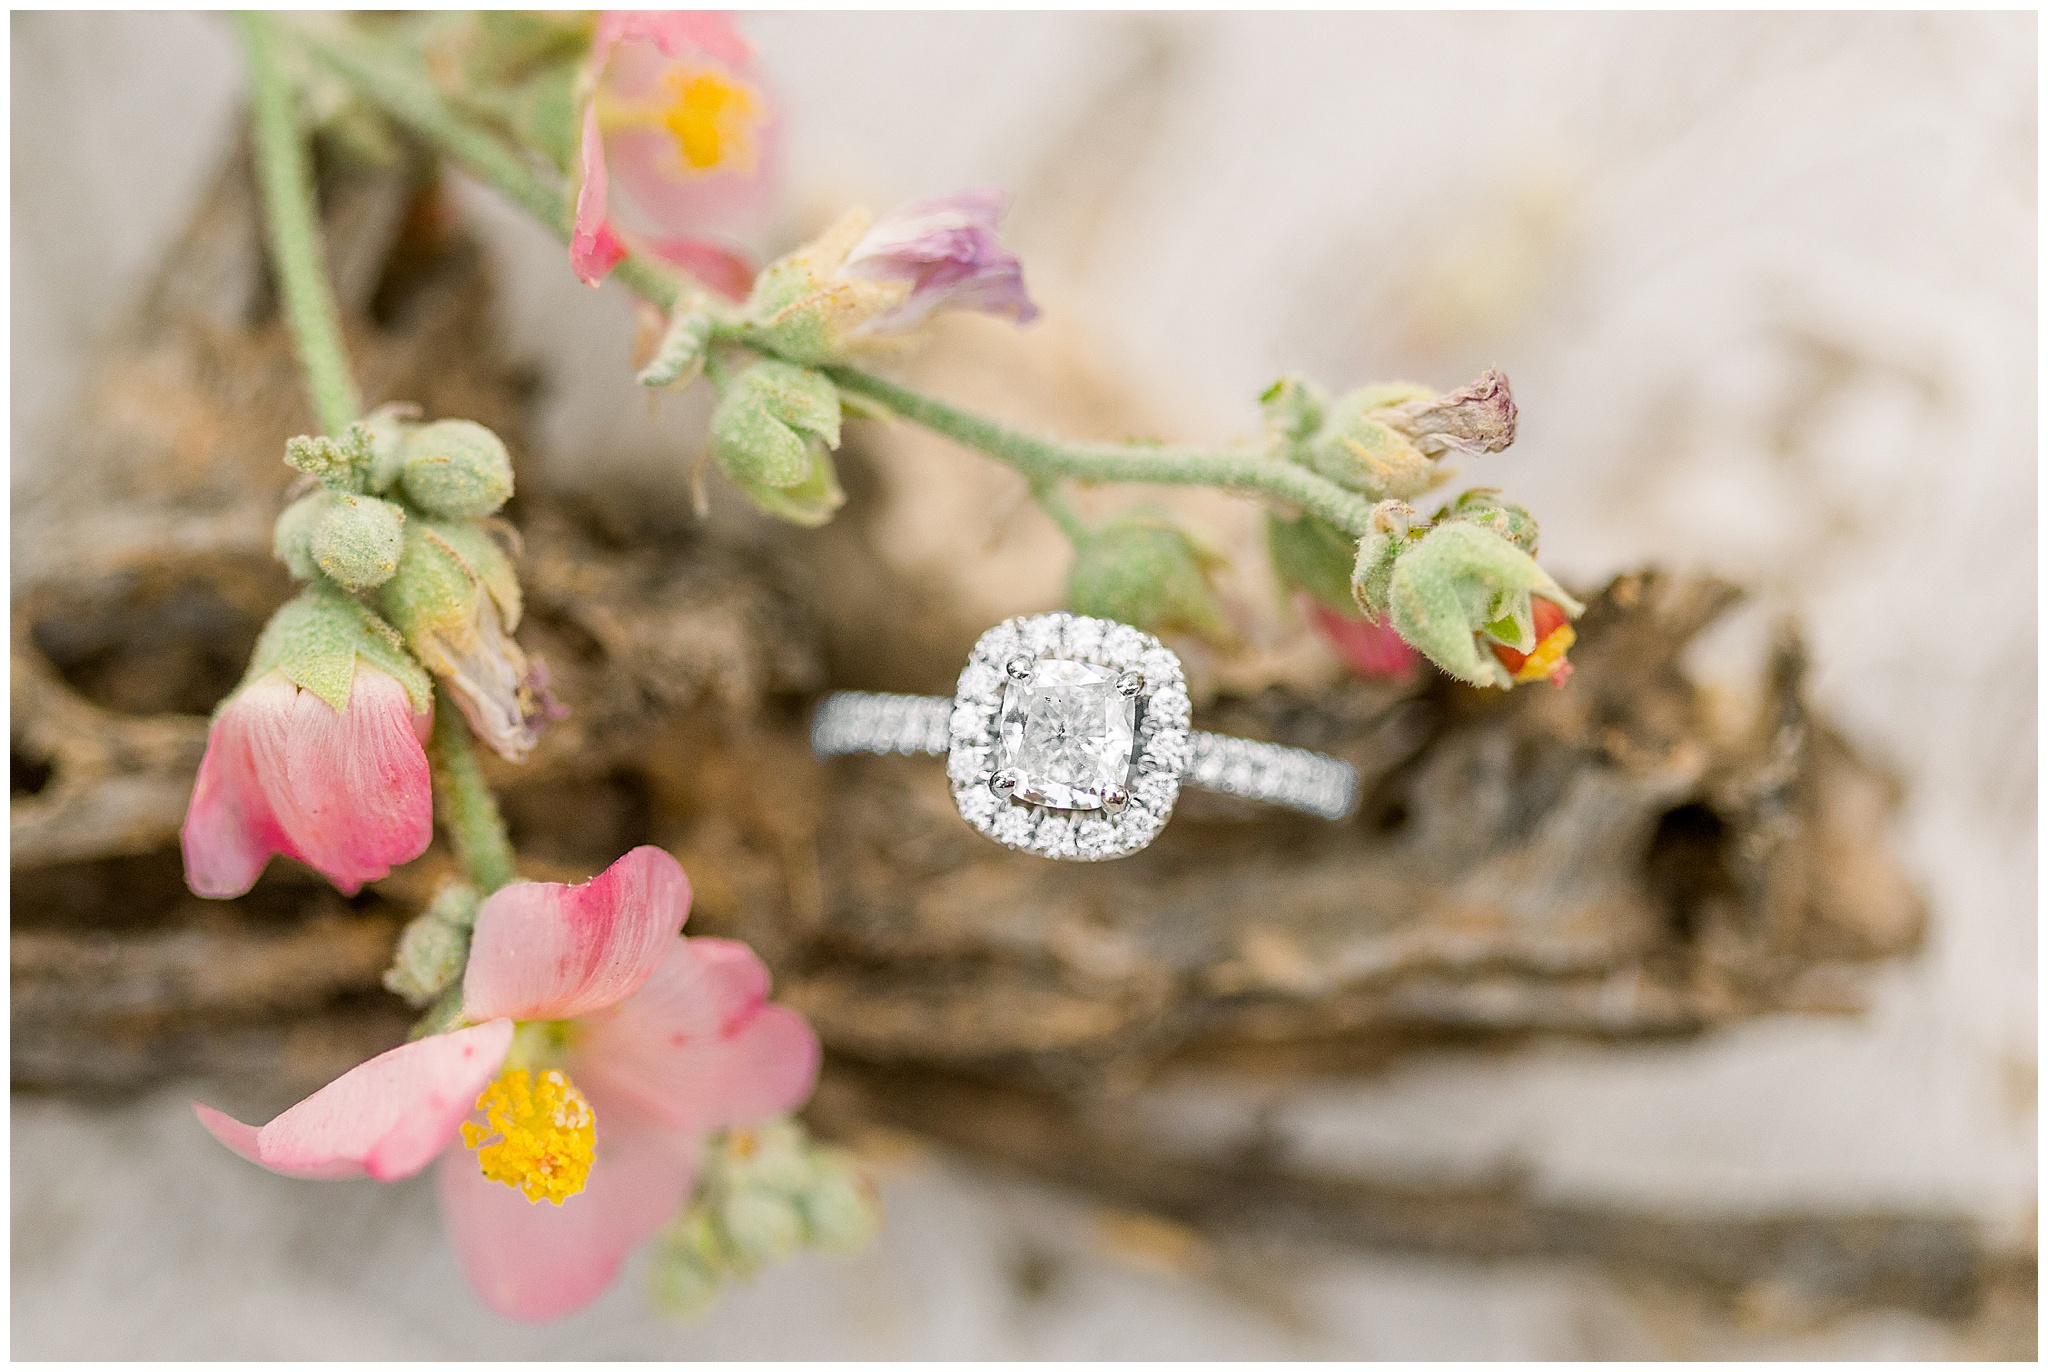 Engagement ring on wood with pink flowers